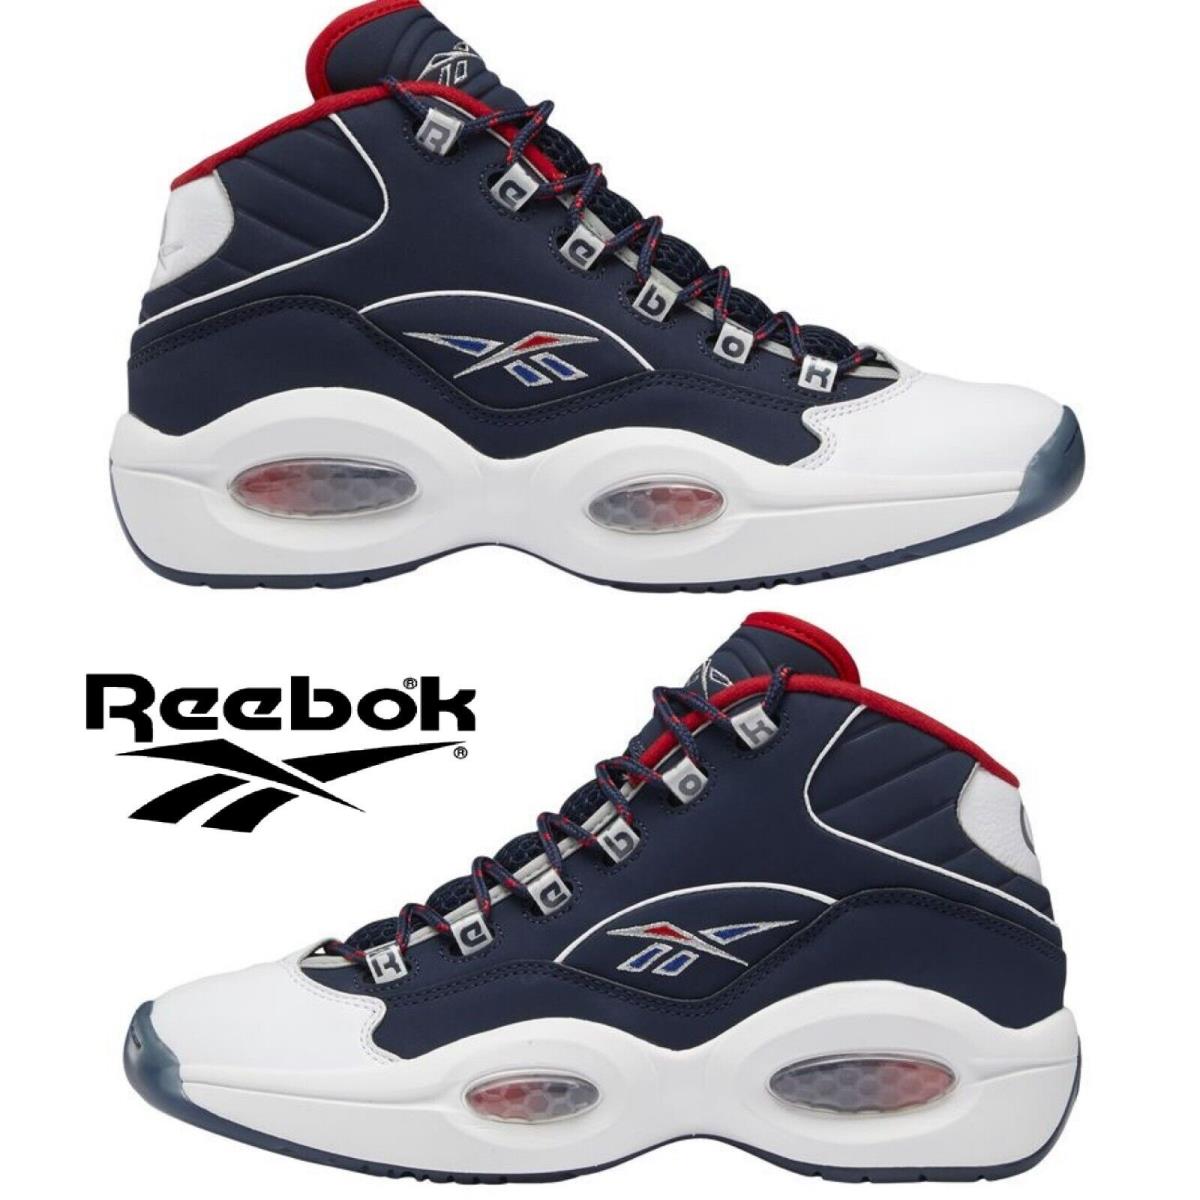 Reebok Question Mid Basketball Shoes Men`s Sneakers Running Casual Sport - Blue , Navy/White/Red Manufacturer